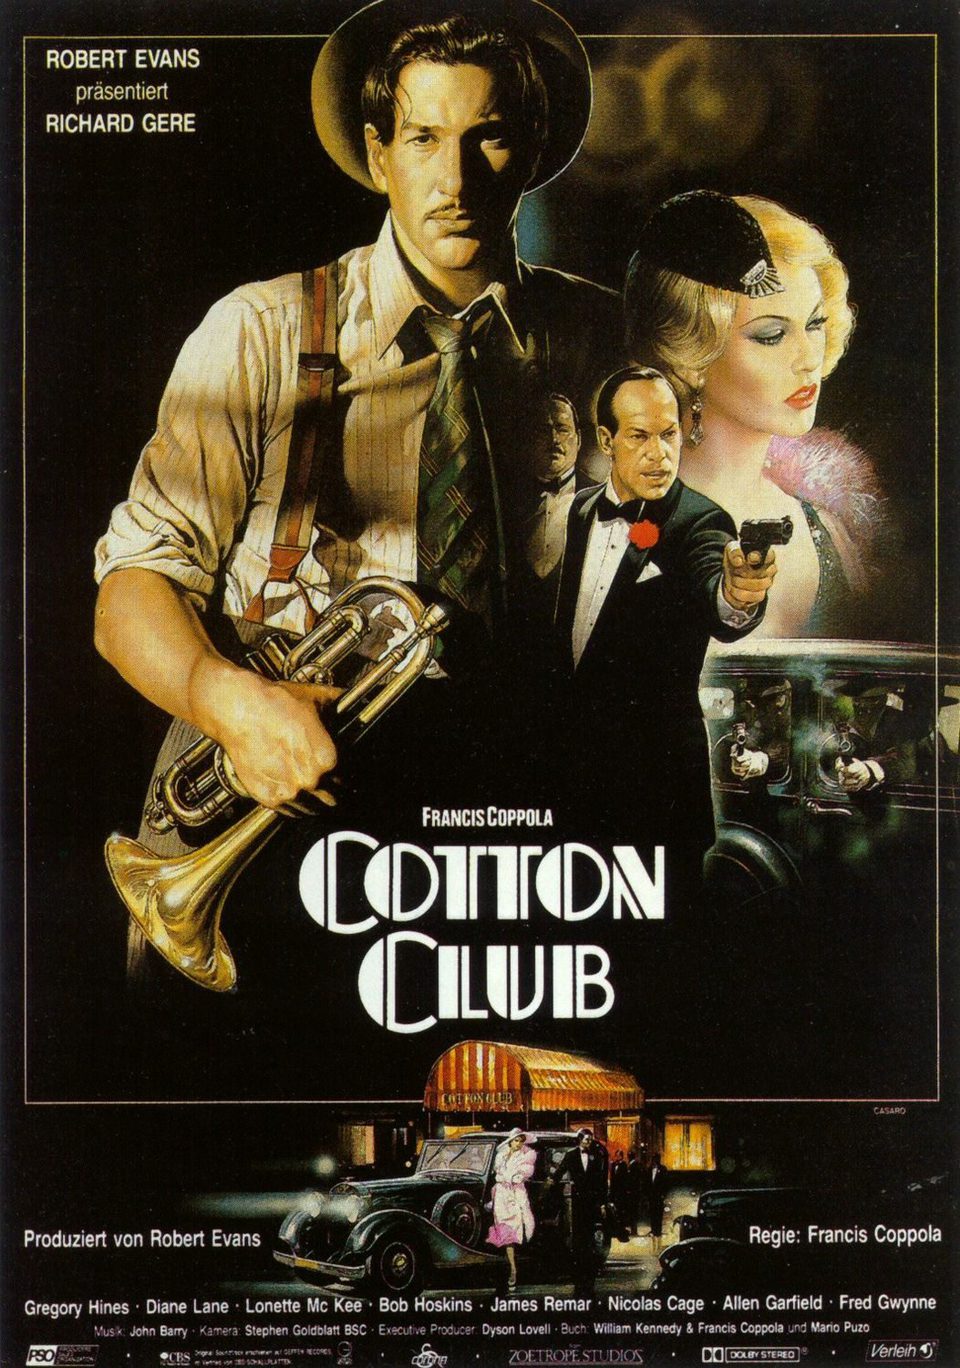 Poster of The Cotton Club - EE.UU